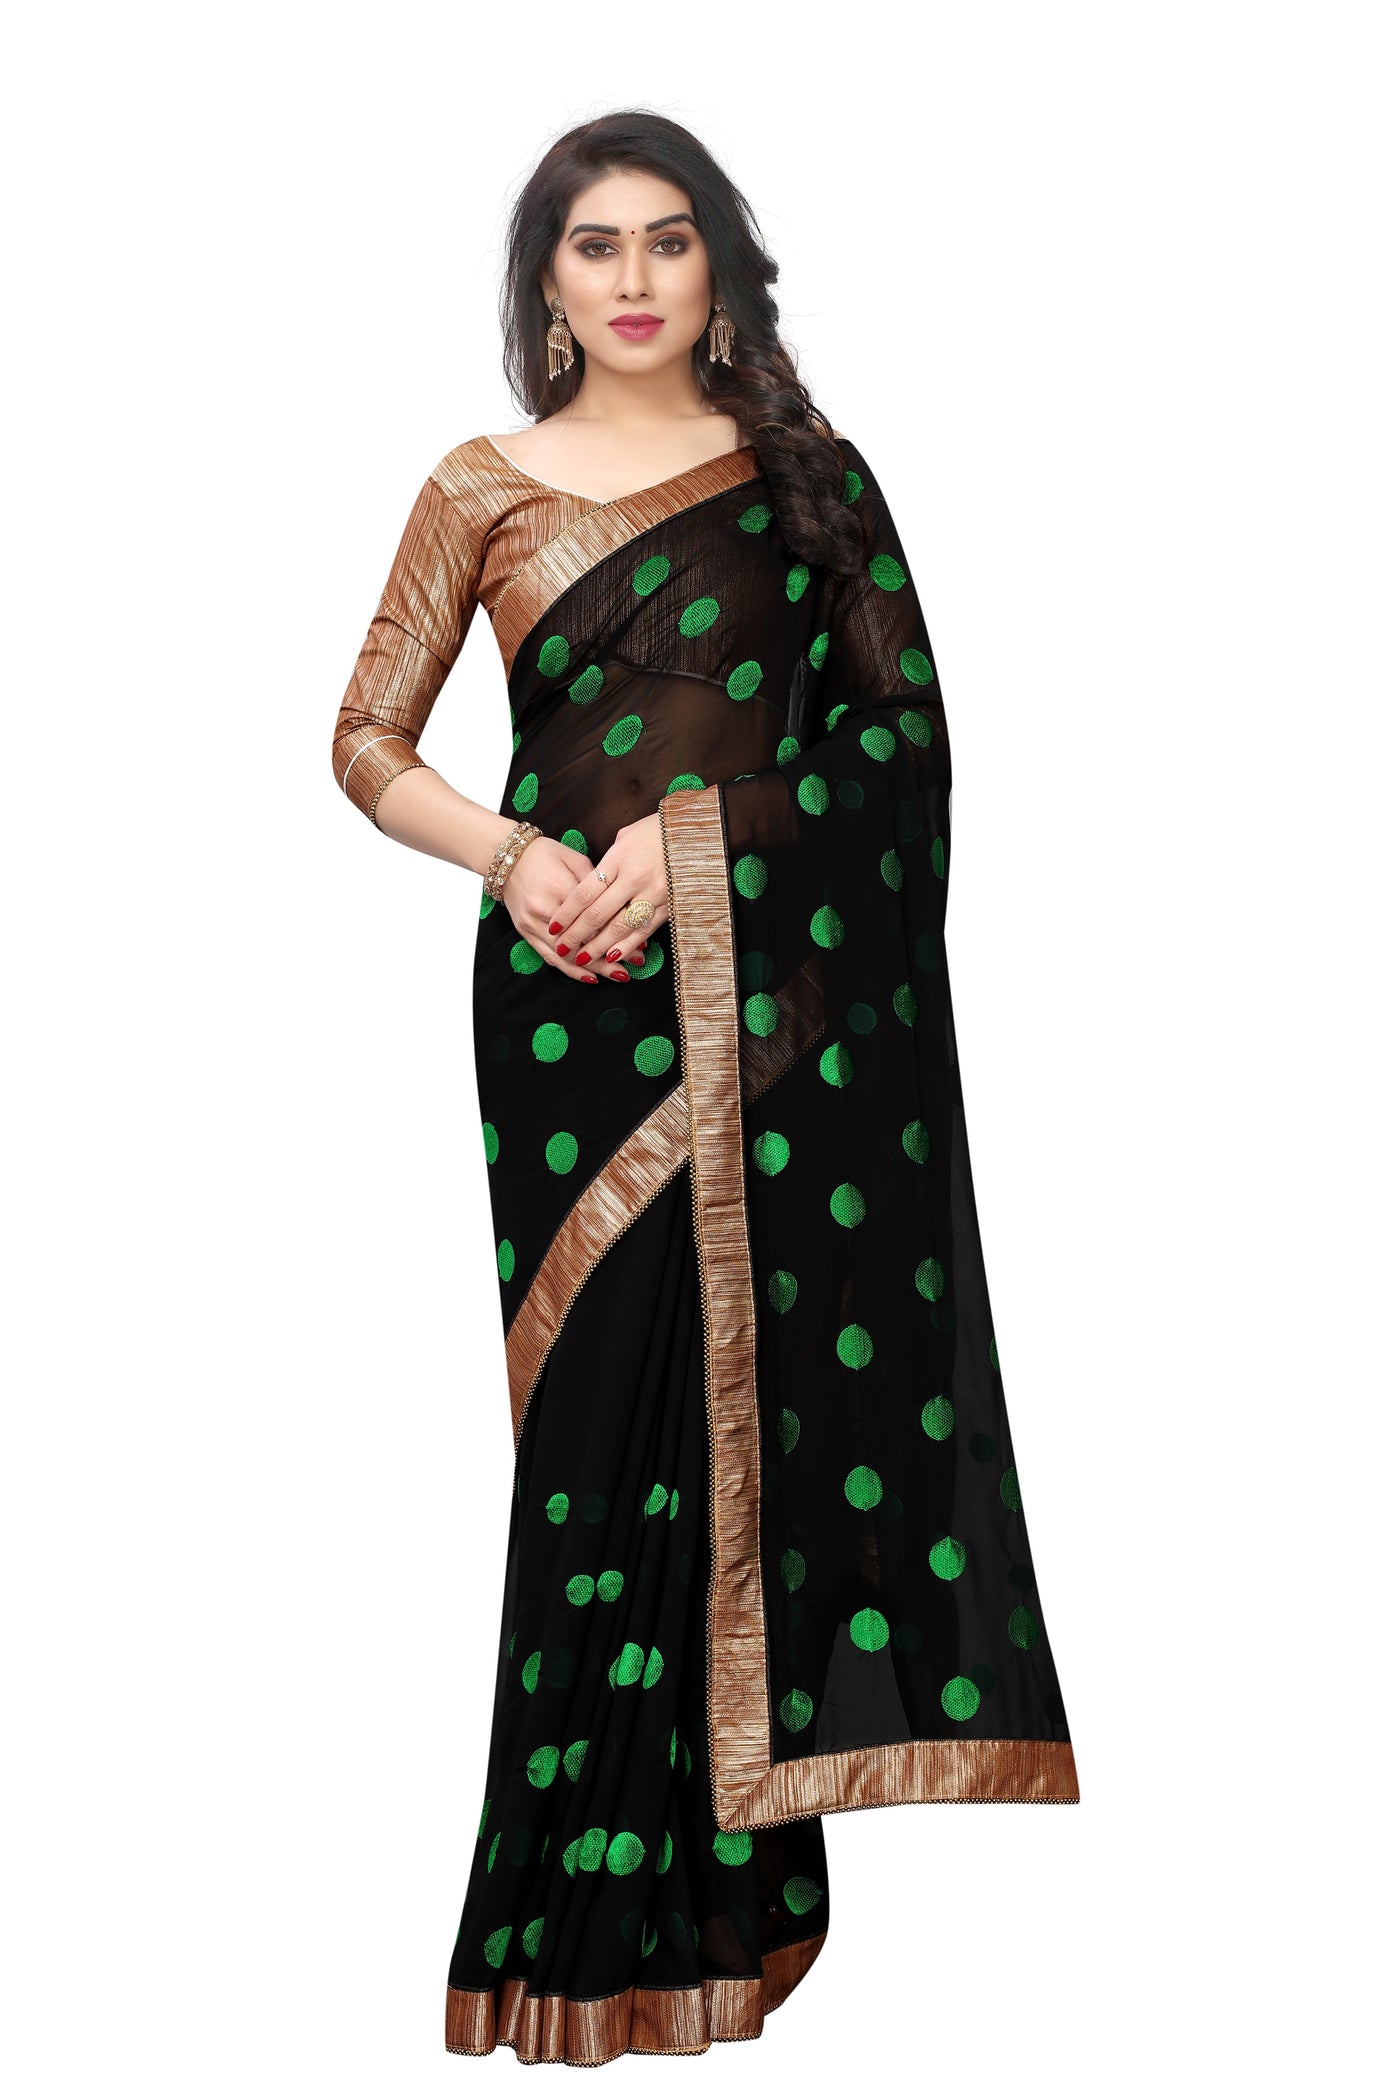 Georgette Black Saree With Blouse